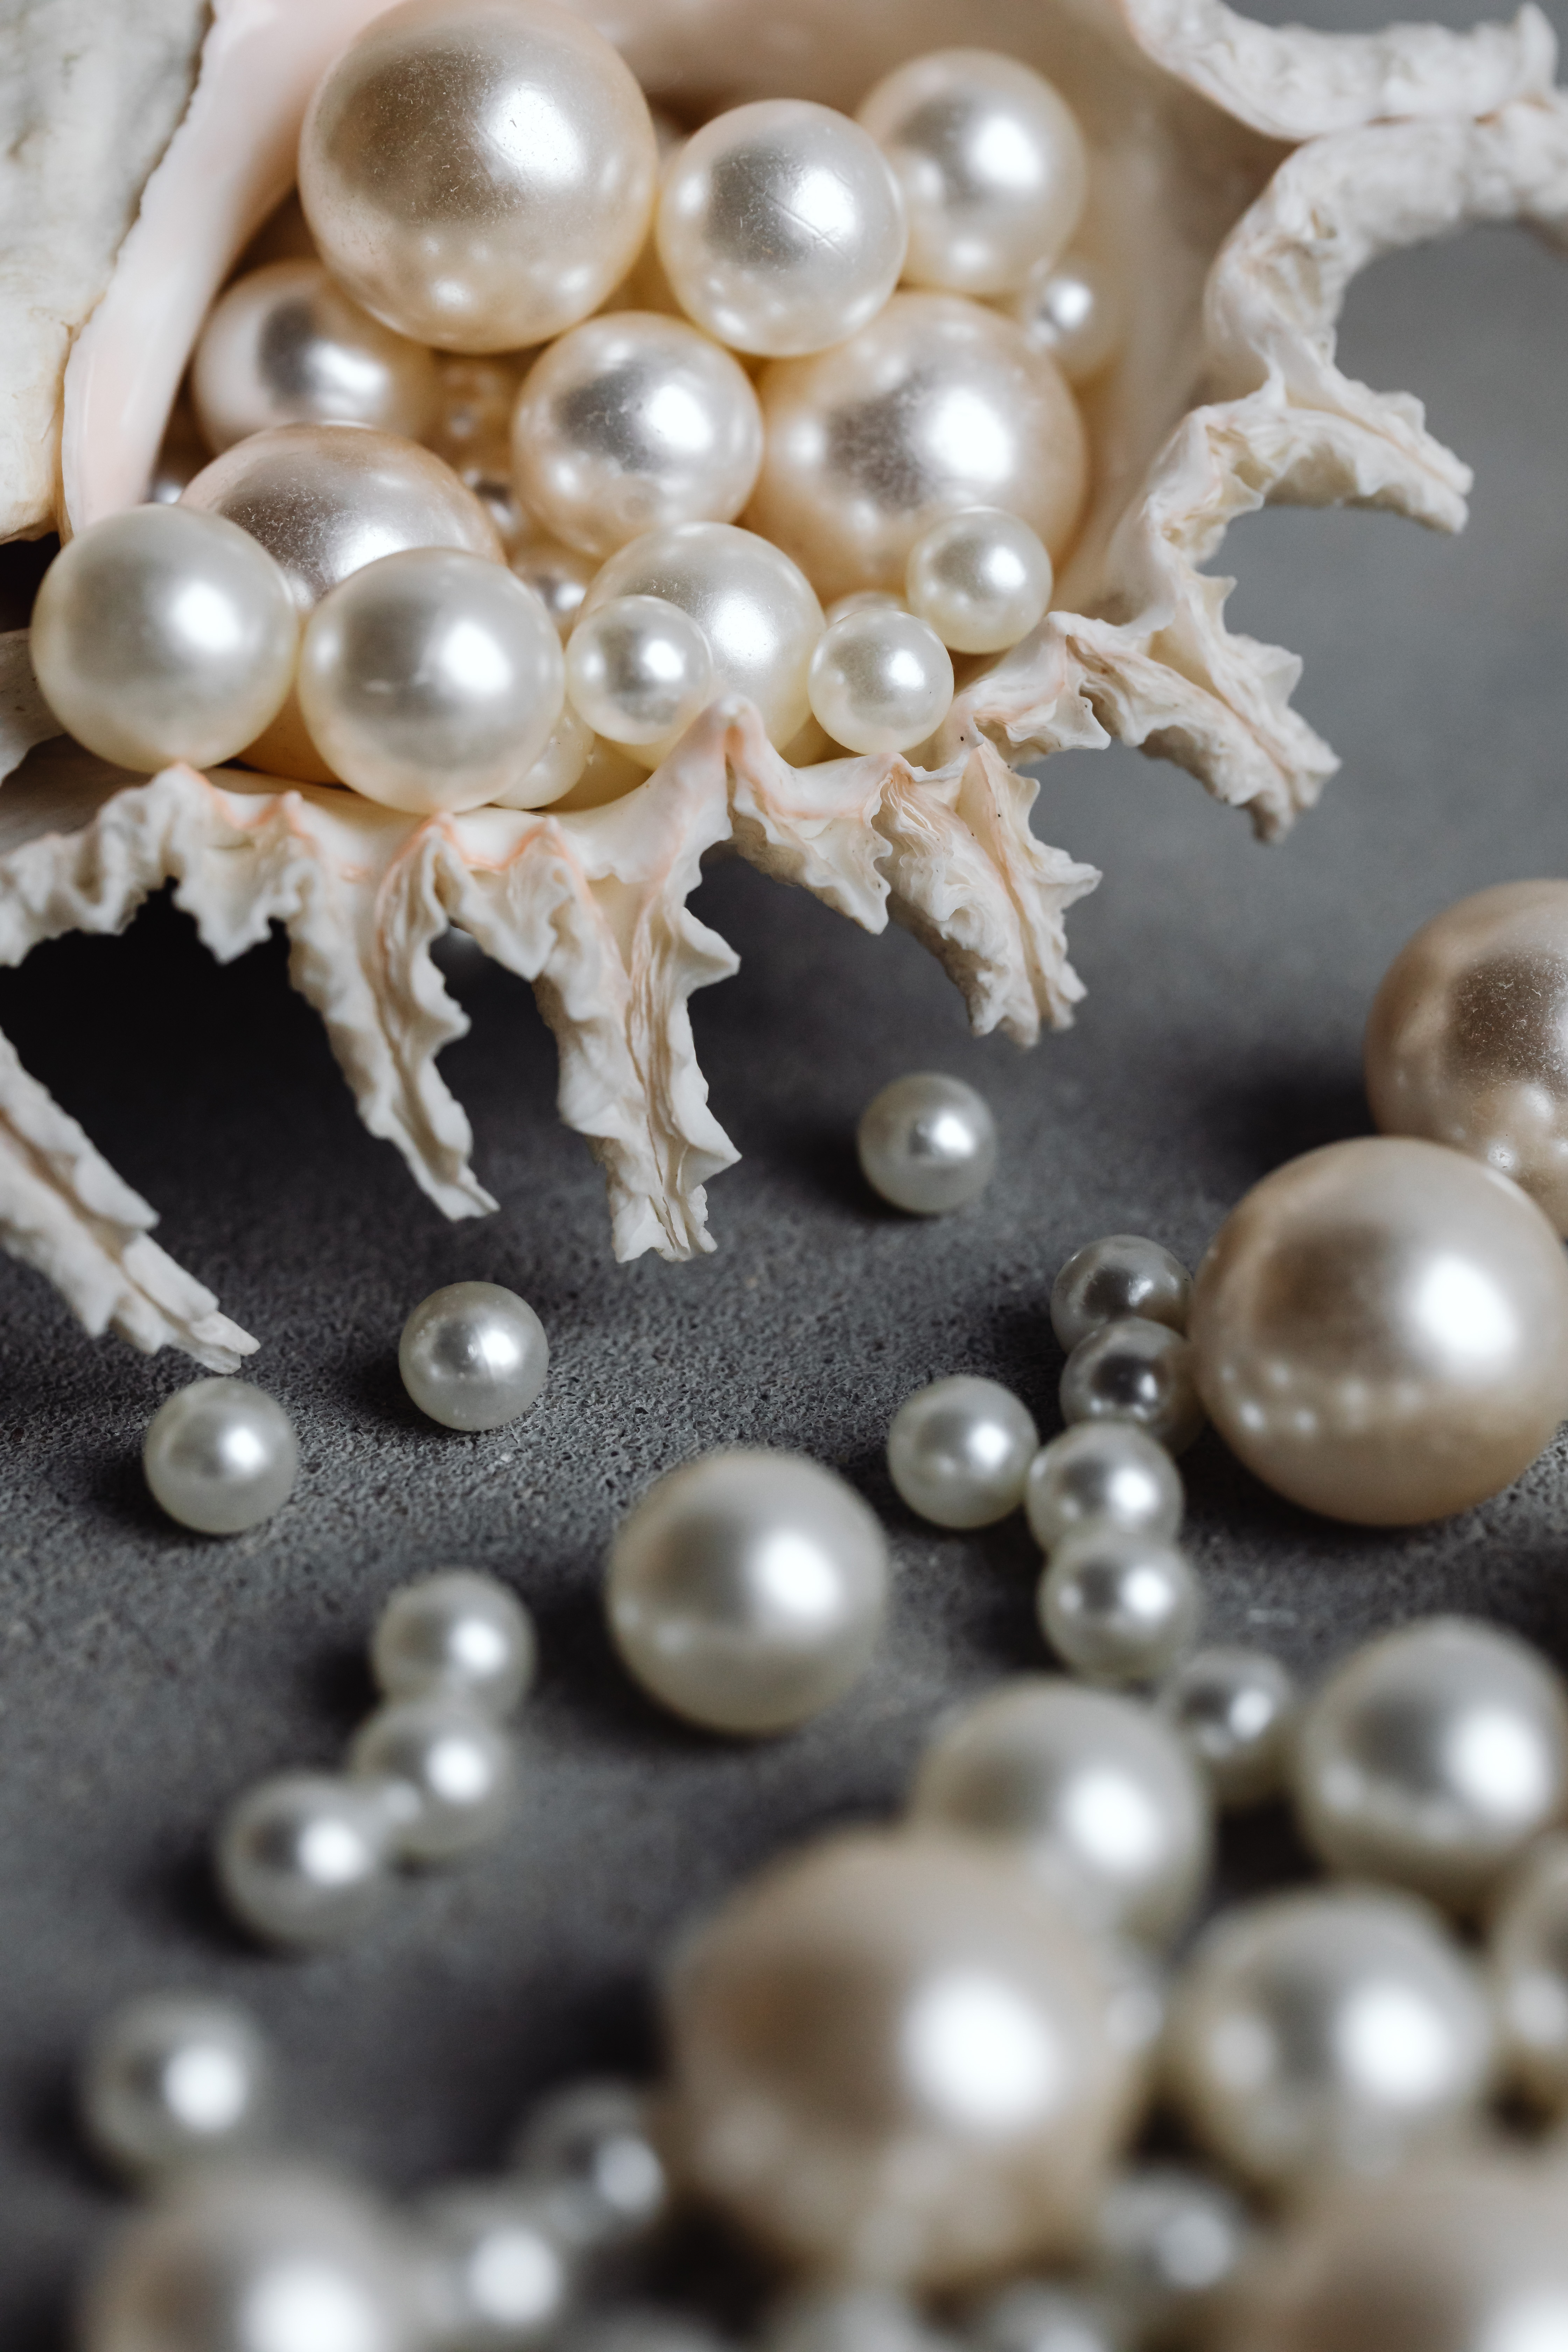 A large shell with pearls spilling out of it